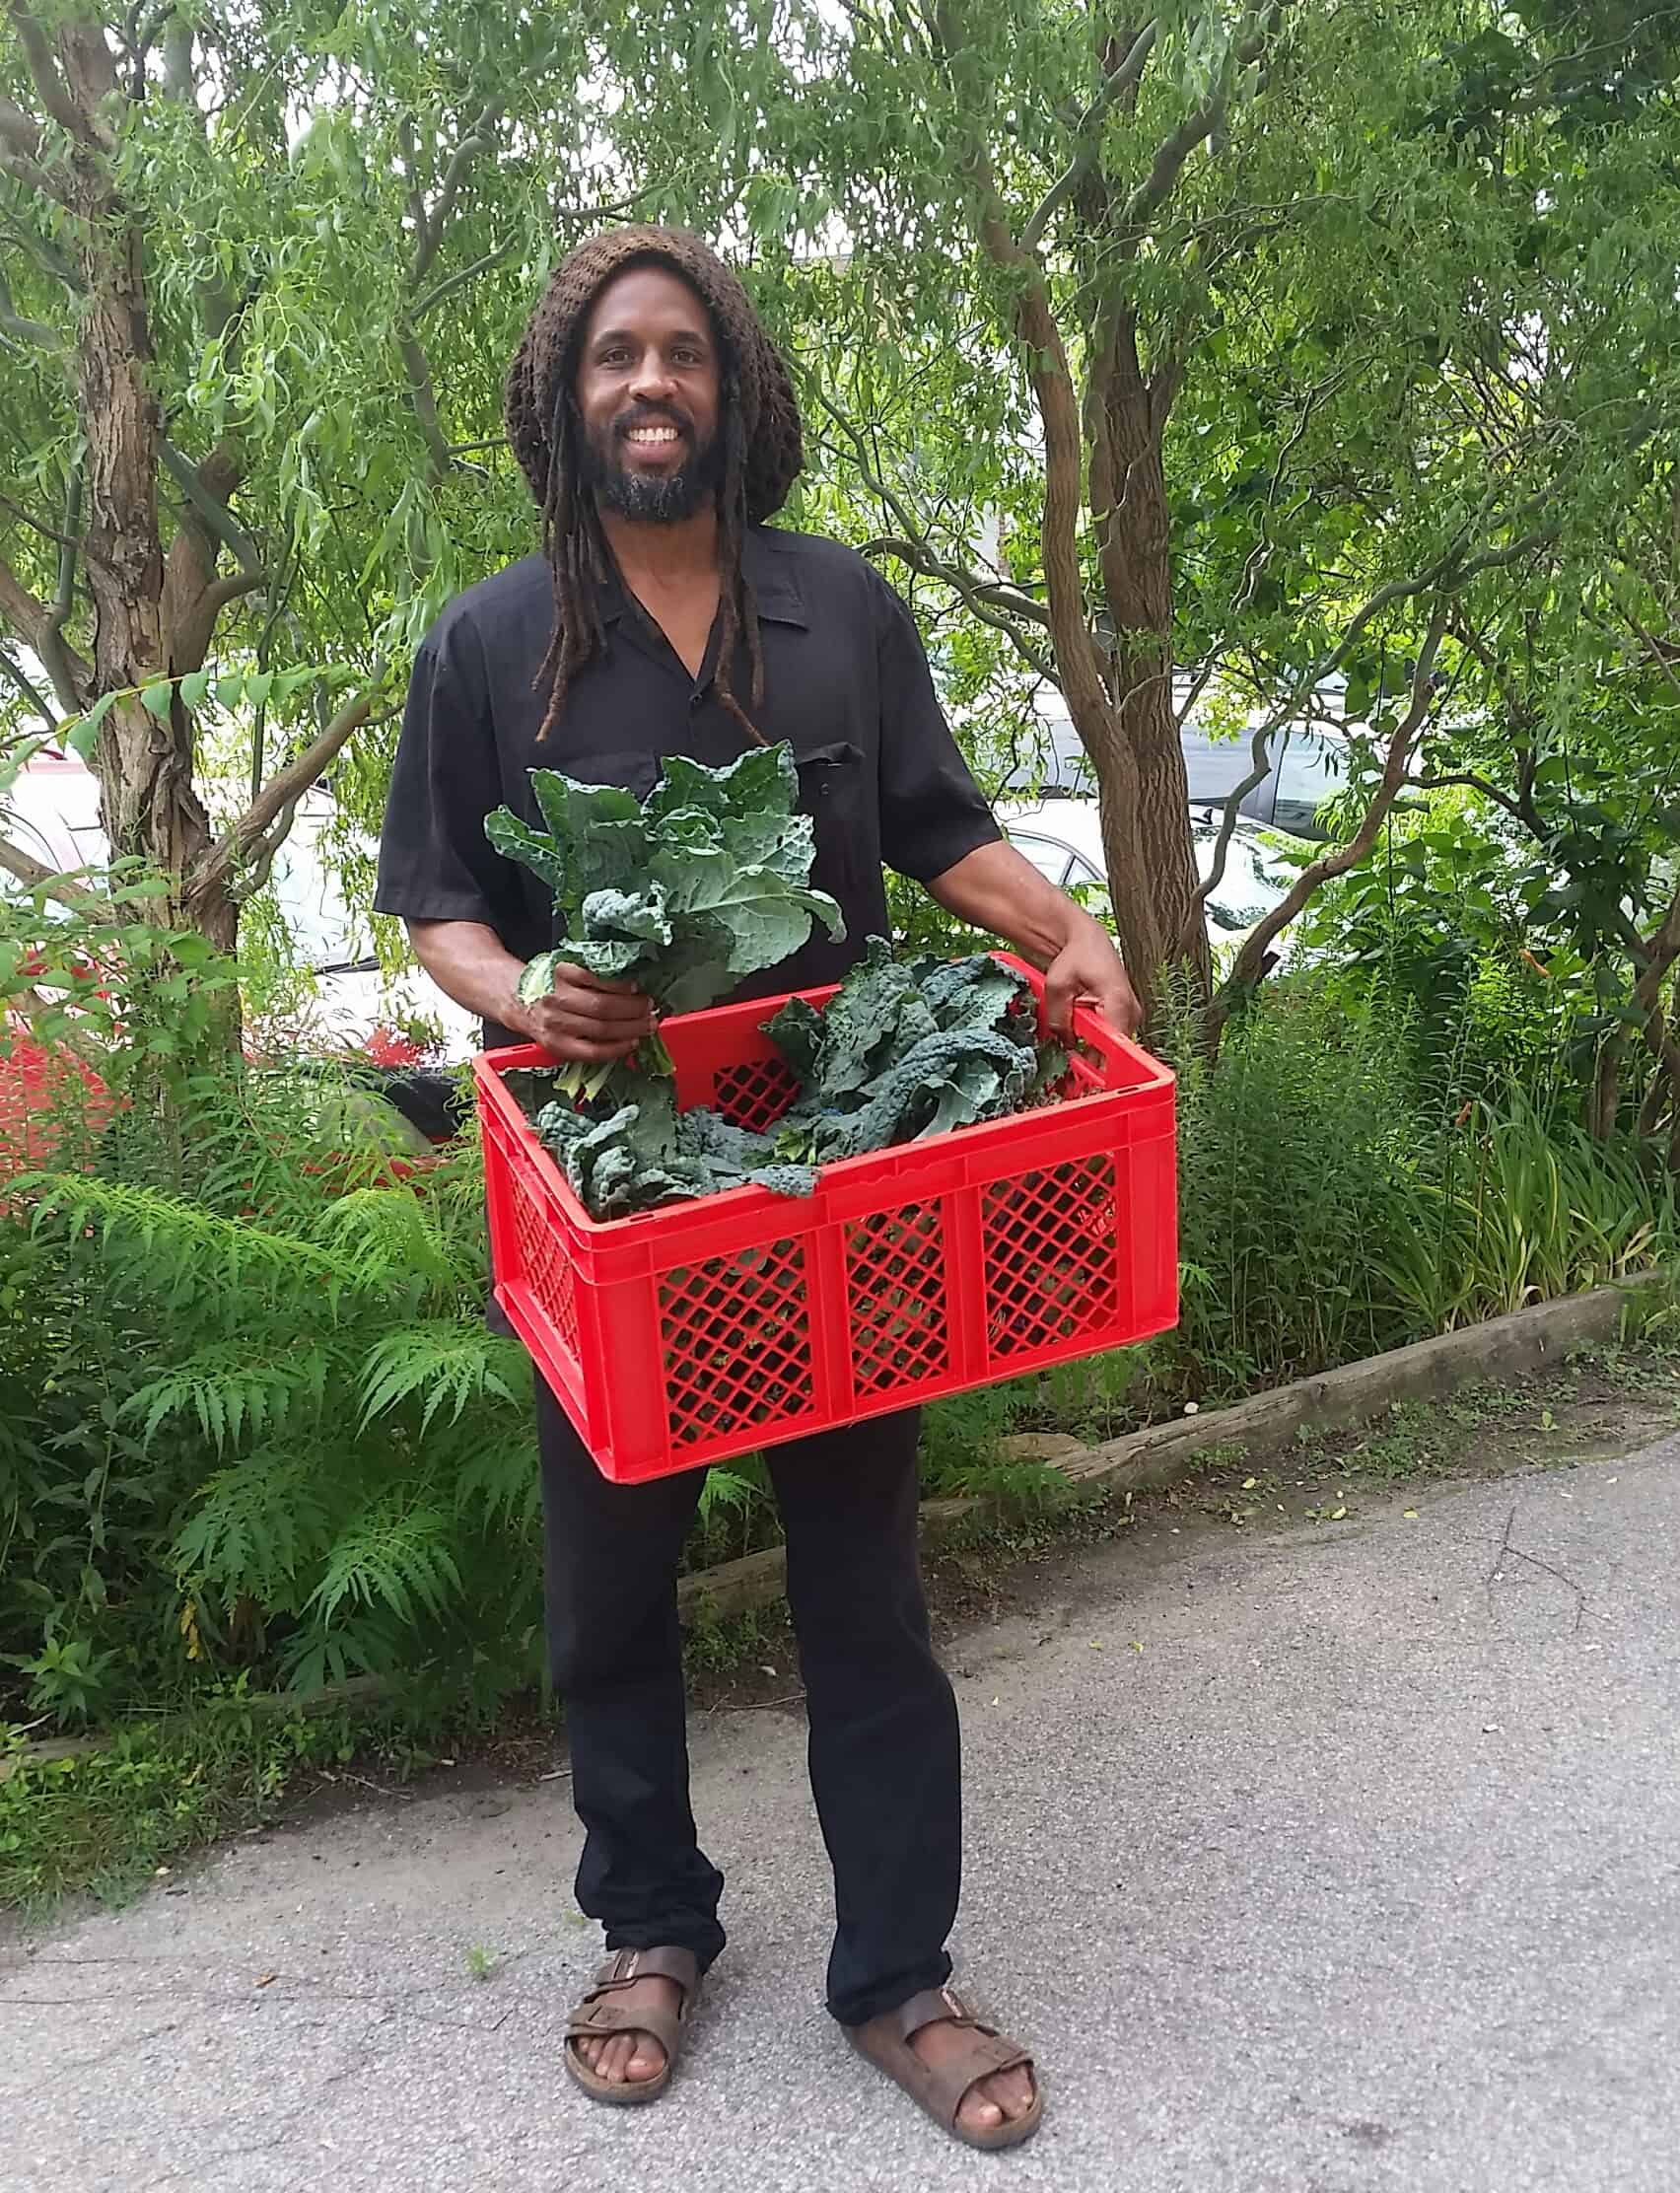 Shabaka standing tall and smiling with beard, dreadlocks, and a crate of crisp kale